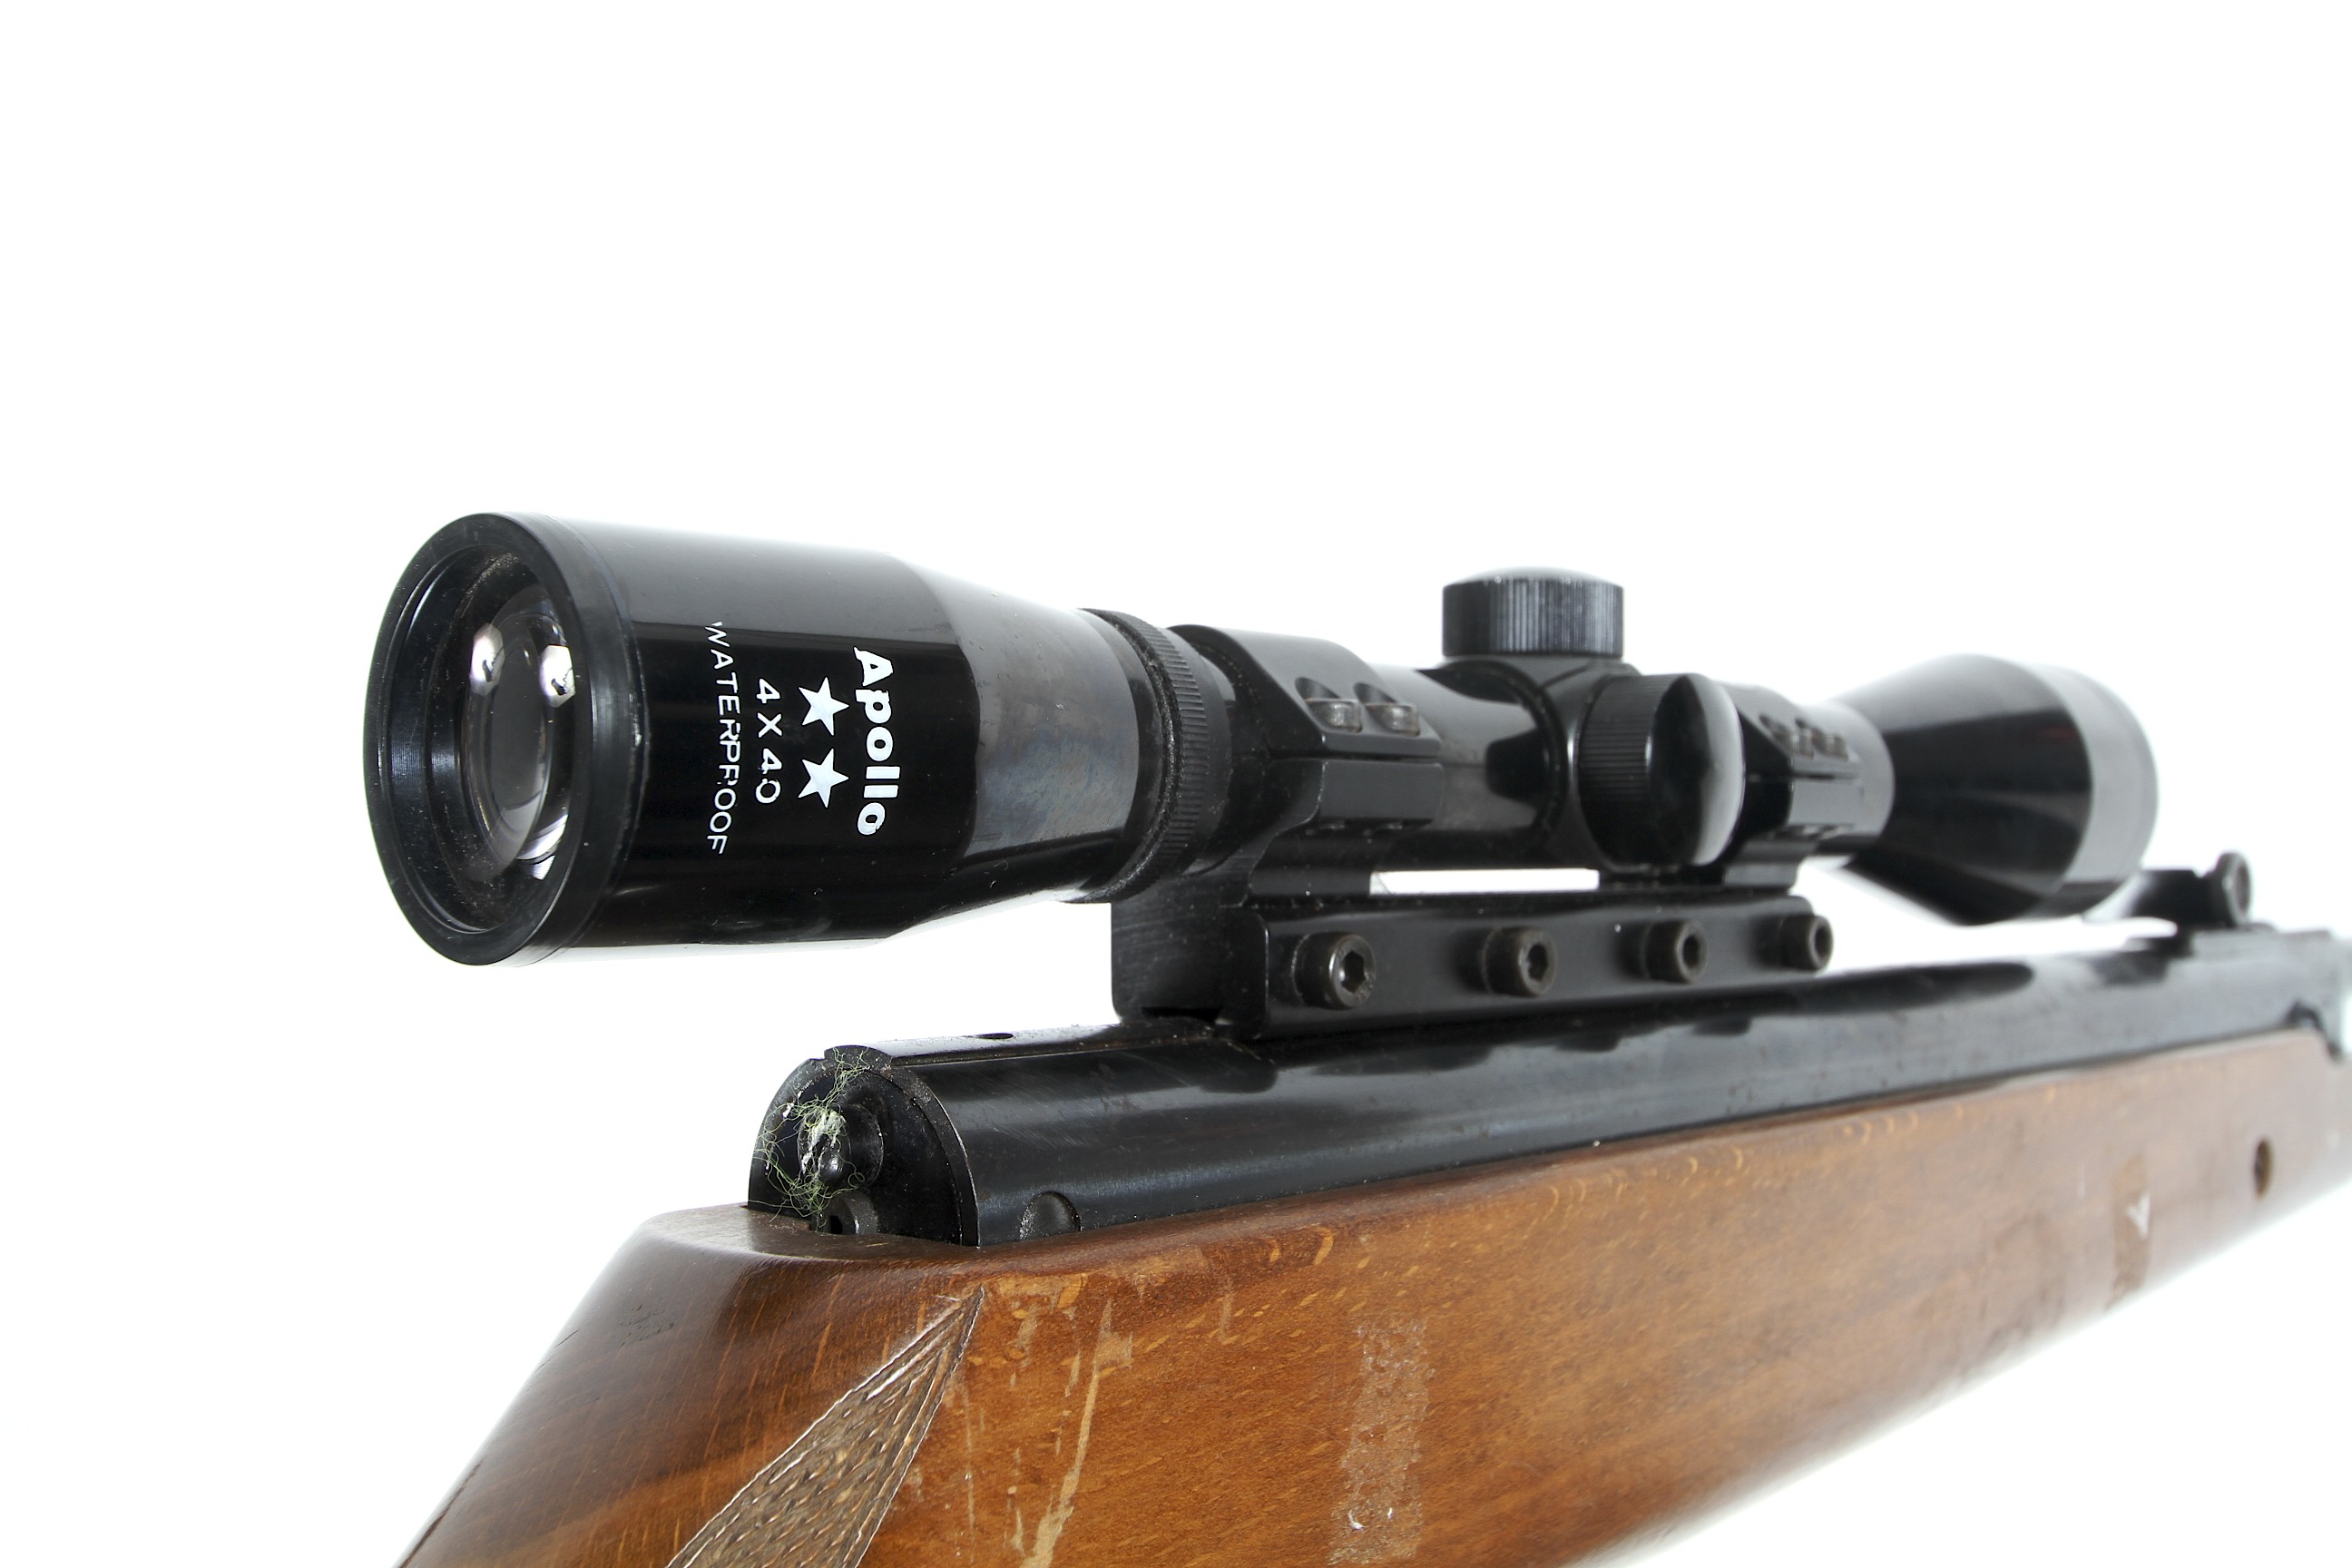 A Weihrauch HW90 Theoben air rifle, 5.5 kal, with Apollo 4 x 40 waterproof scope. - Image 4 of 4